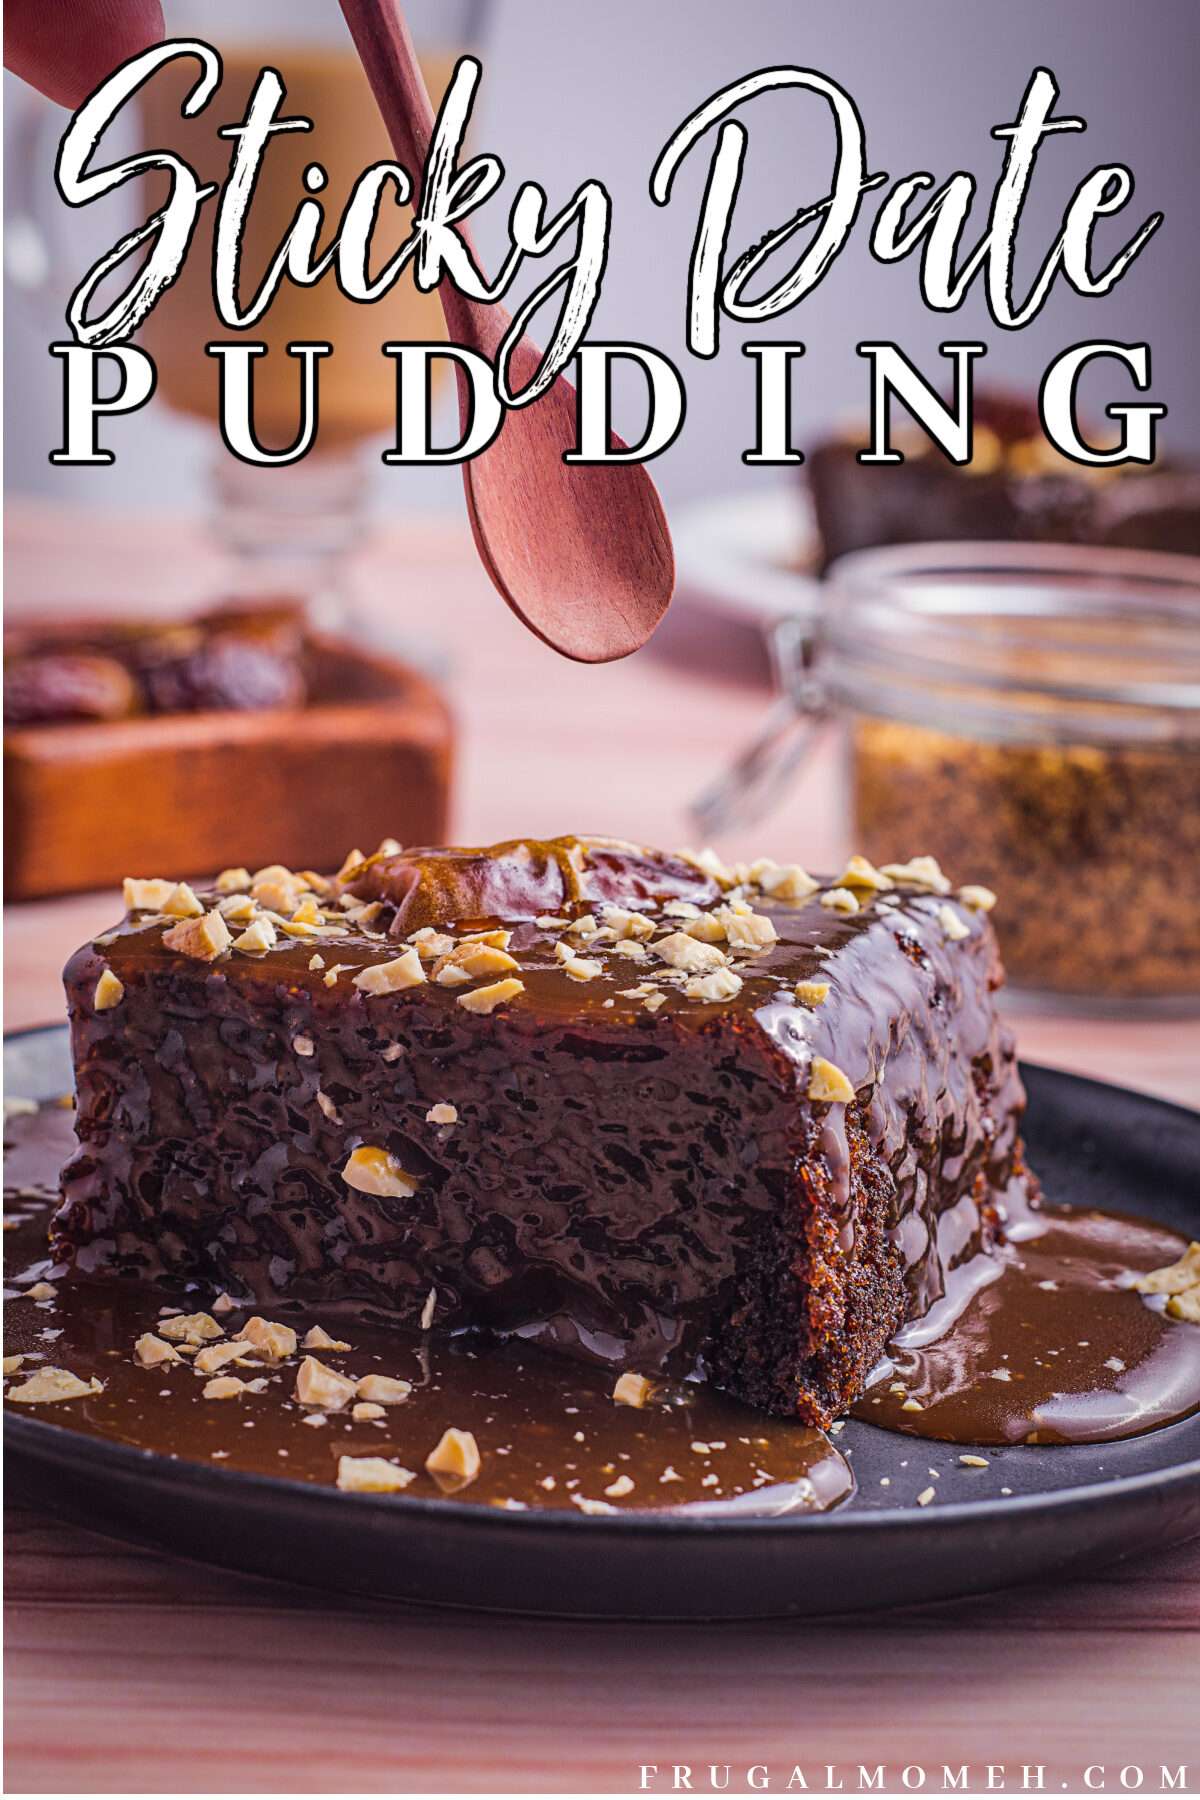 Sticky date pudding is rich, sweet and absolutely delicious. Perfect for dessert on a cold winter day, or part of a holiday dessert table!